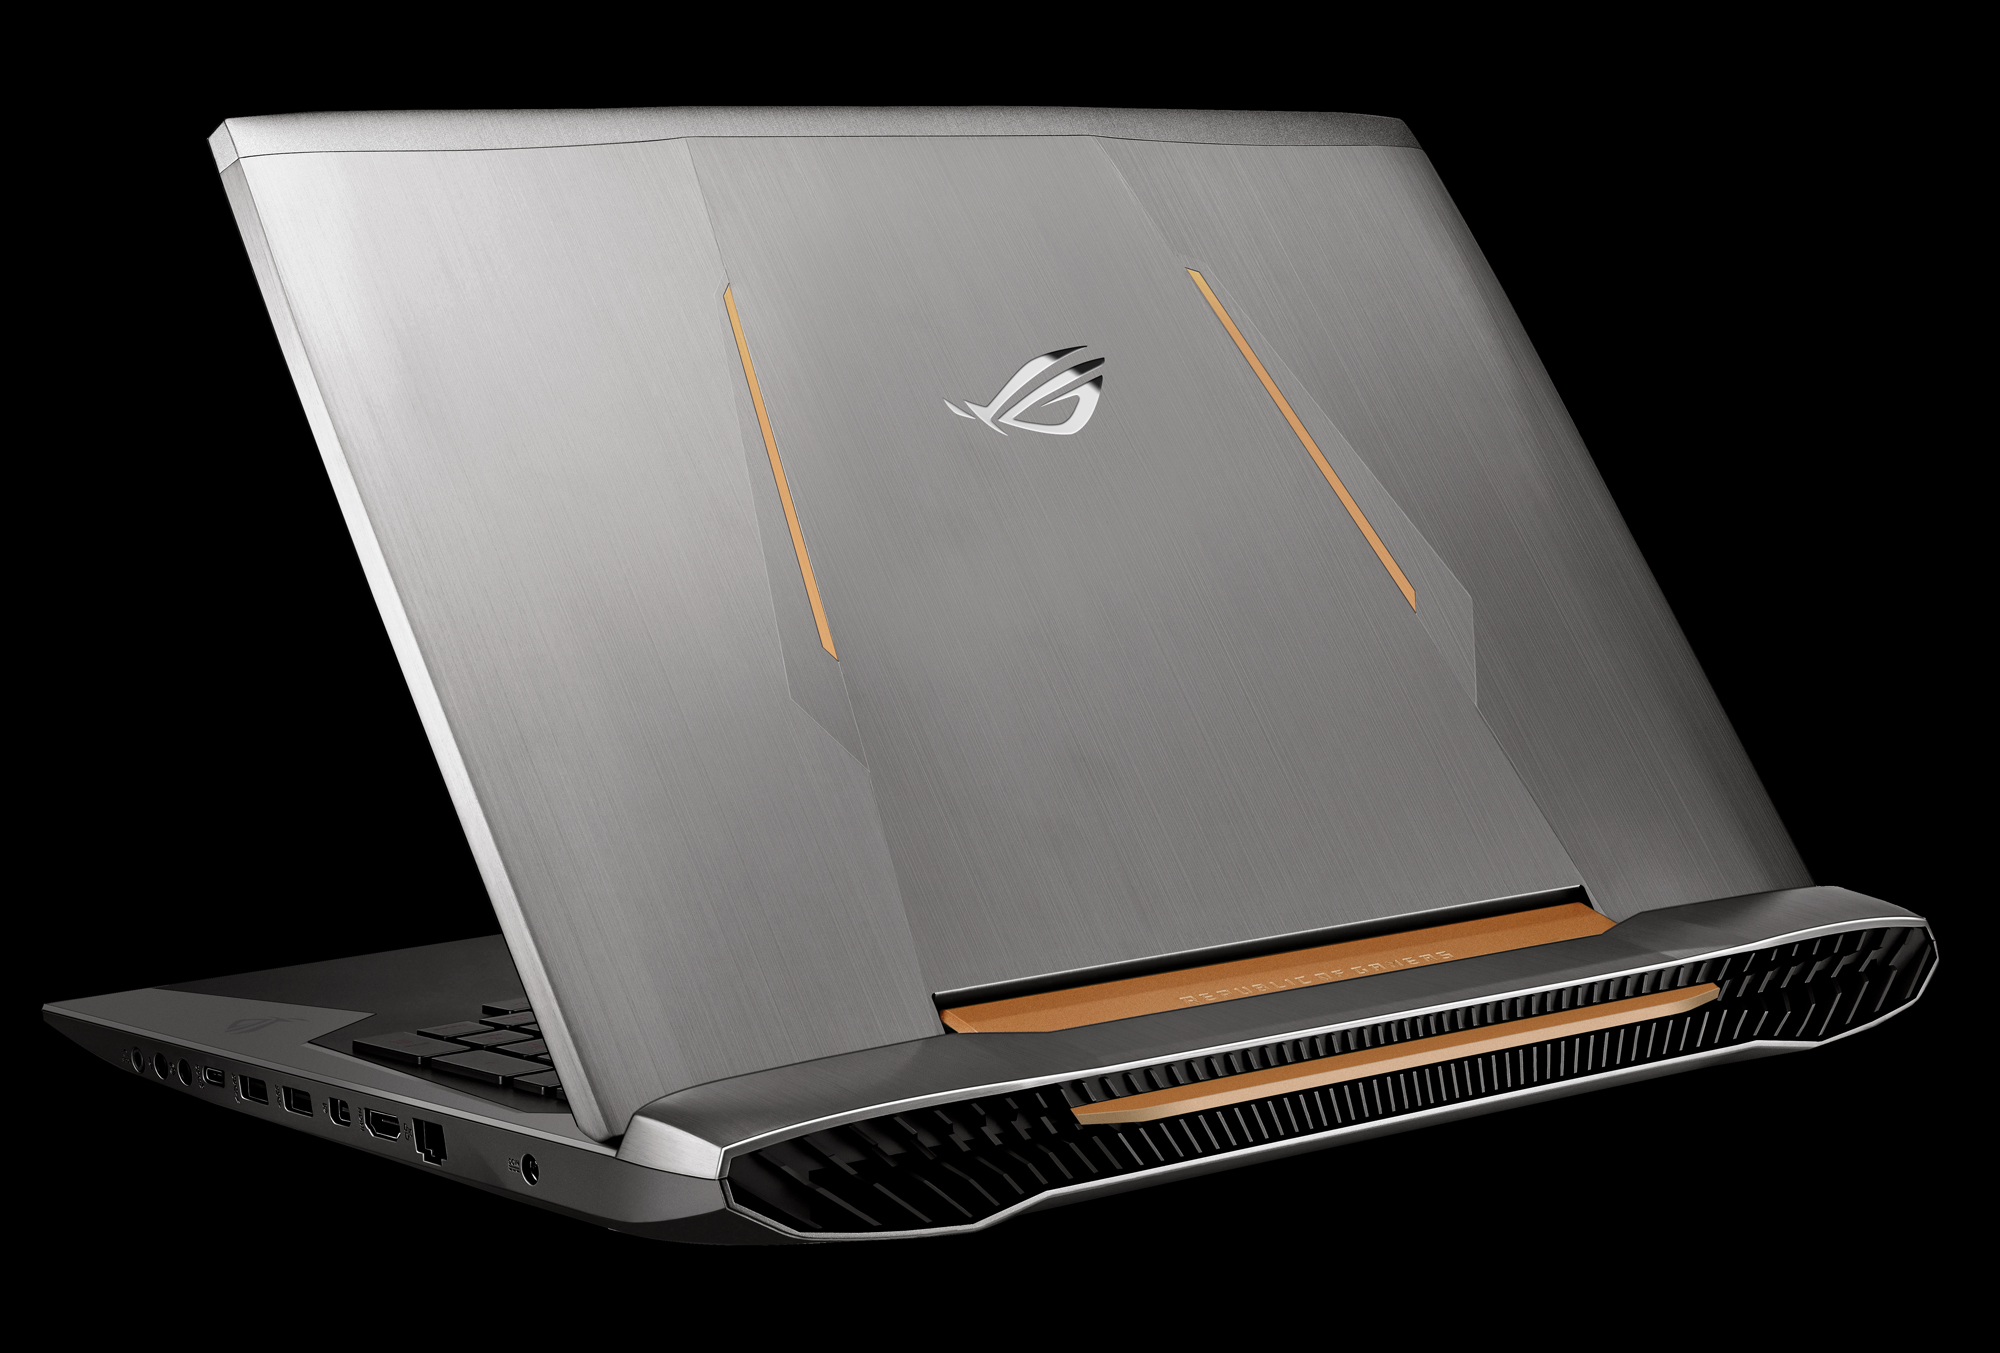 Media asset in full size related to 3dfxzone.it news item entitled as follows: ASUS annuncia la linea di notebook gaming-oriented ROG G752 | Image Name: news23227_ROG_G752VL_VT_2.jpg